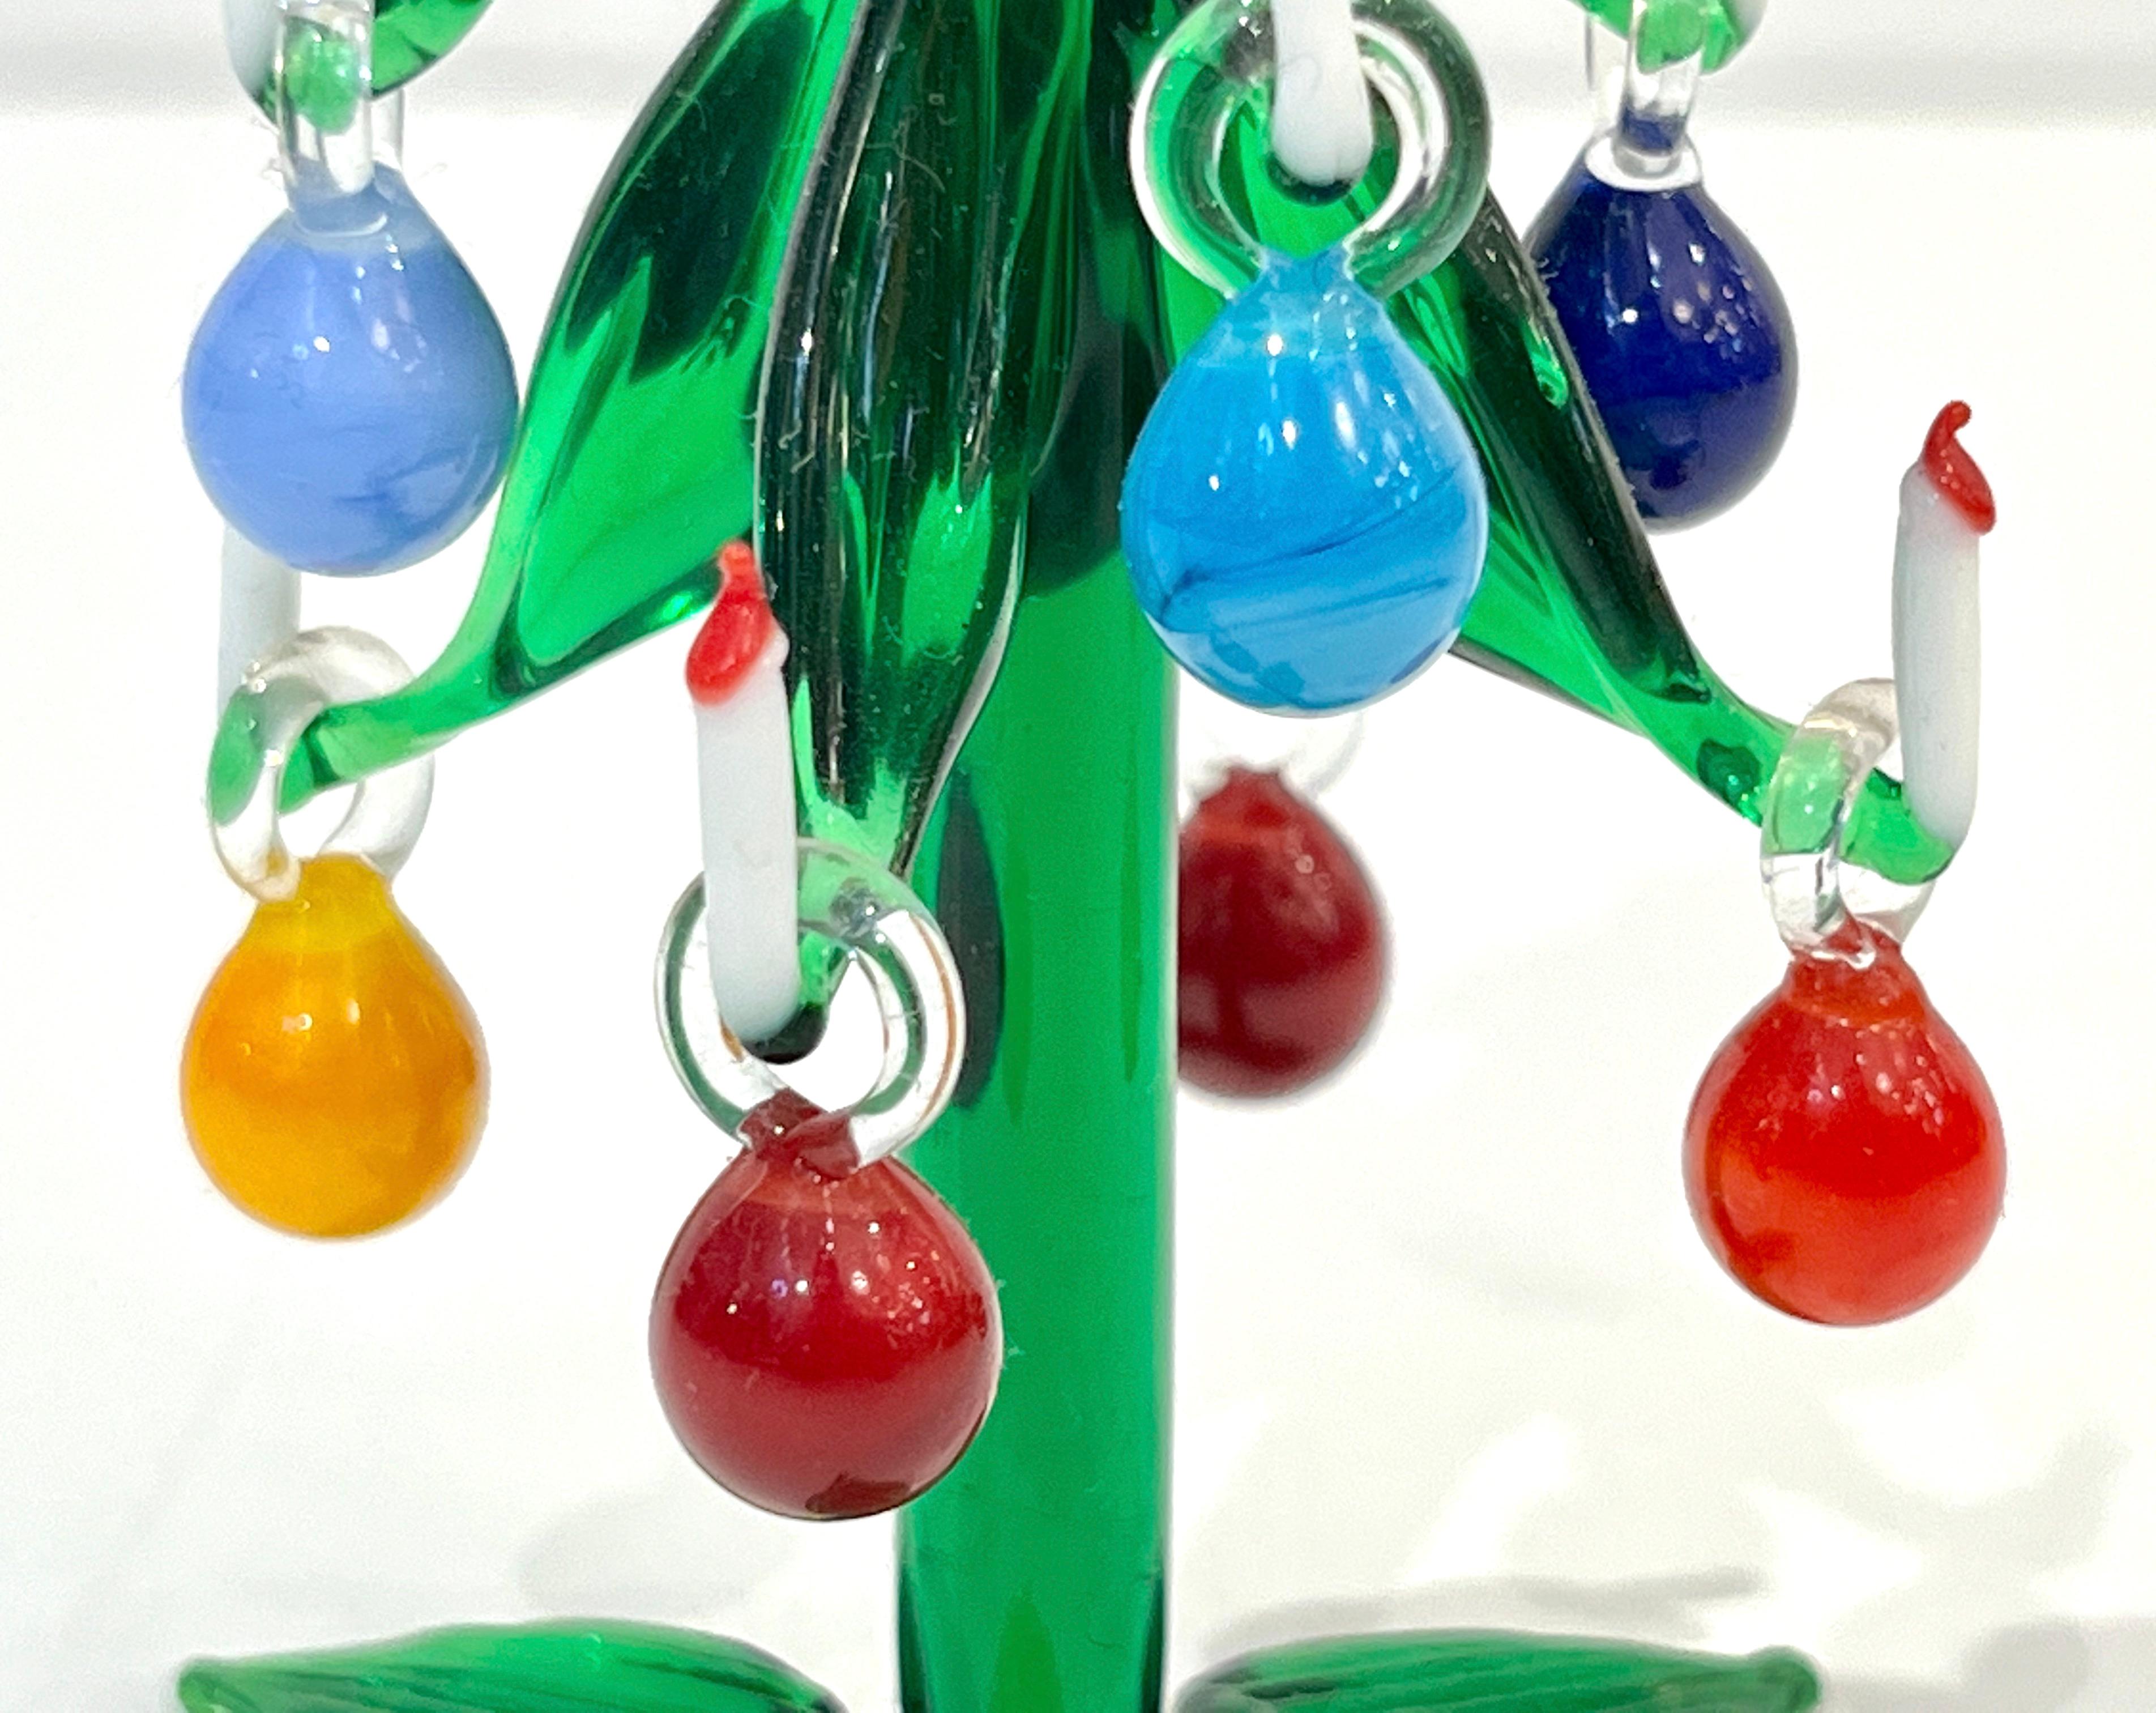 Art Glass Contemporary Italian Green Murano Glass Christmas Tree Sculpture with ornaments